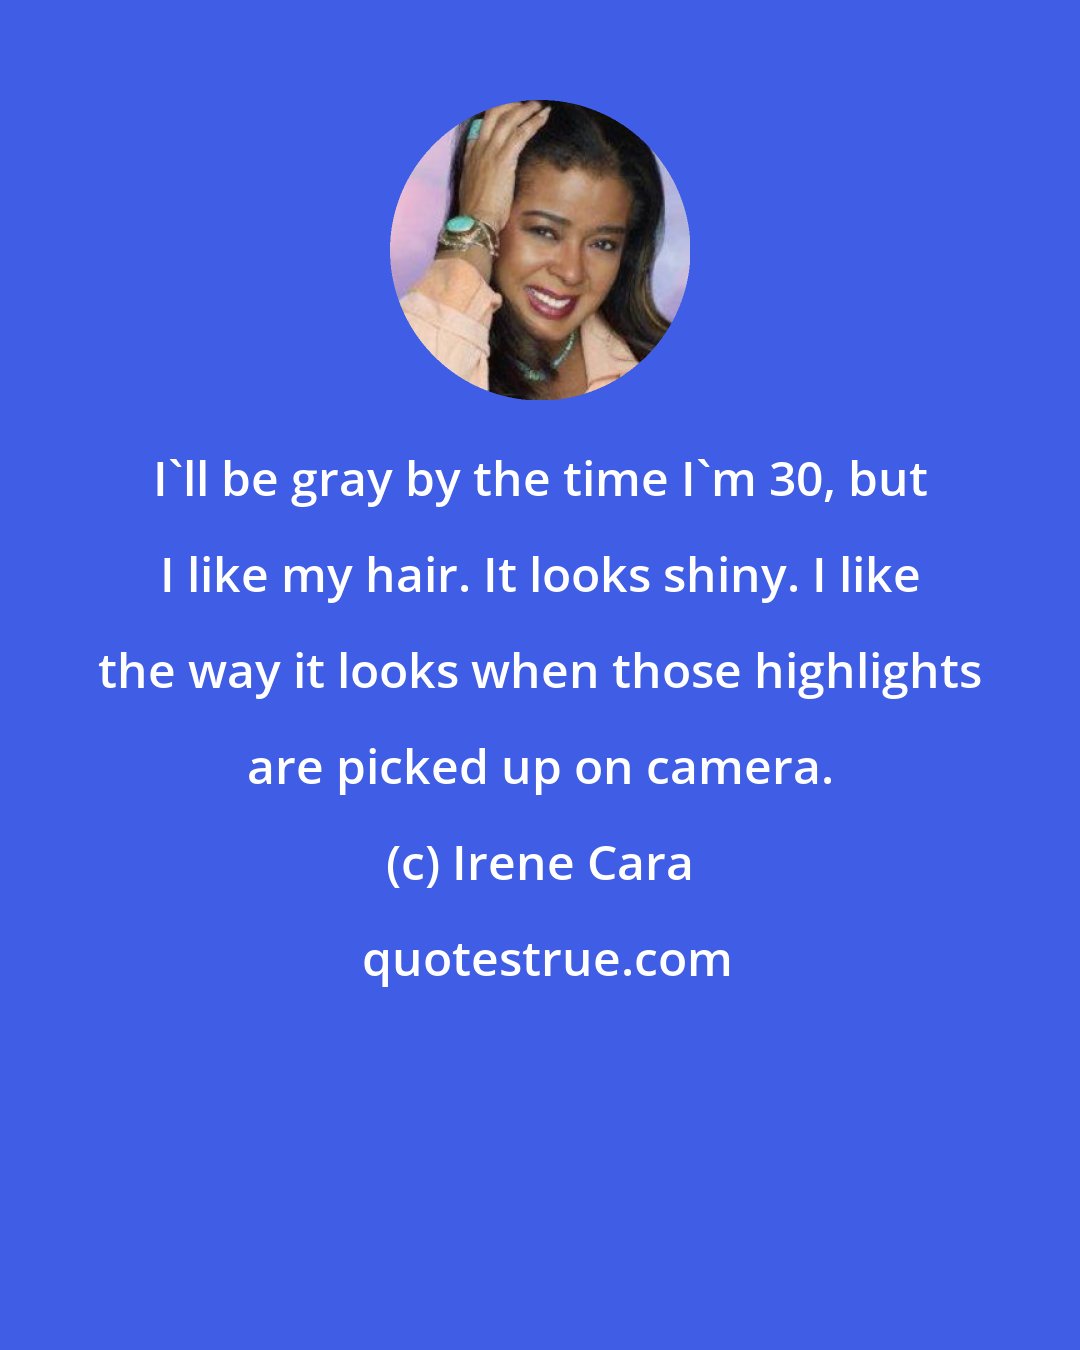 Irene Cara: I'll be gray by the time I'm 30, but I like my hair. It looks shiny. I like the way it looks when those highlights are picked up on camera.